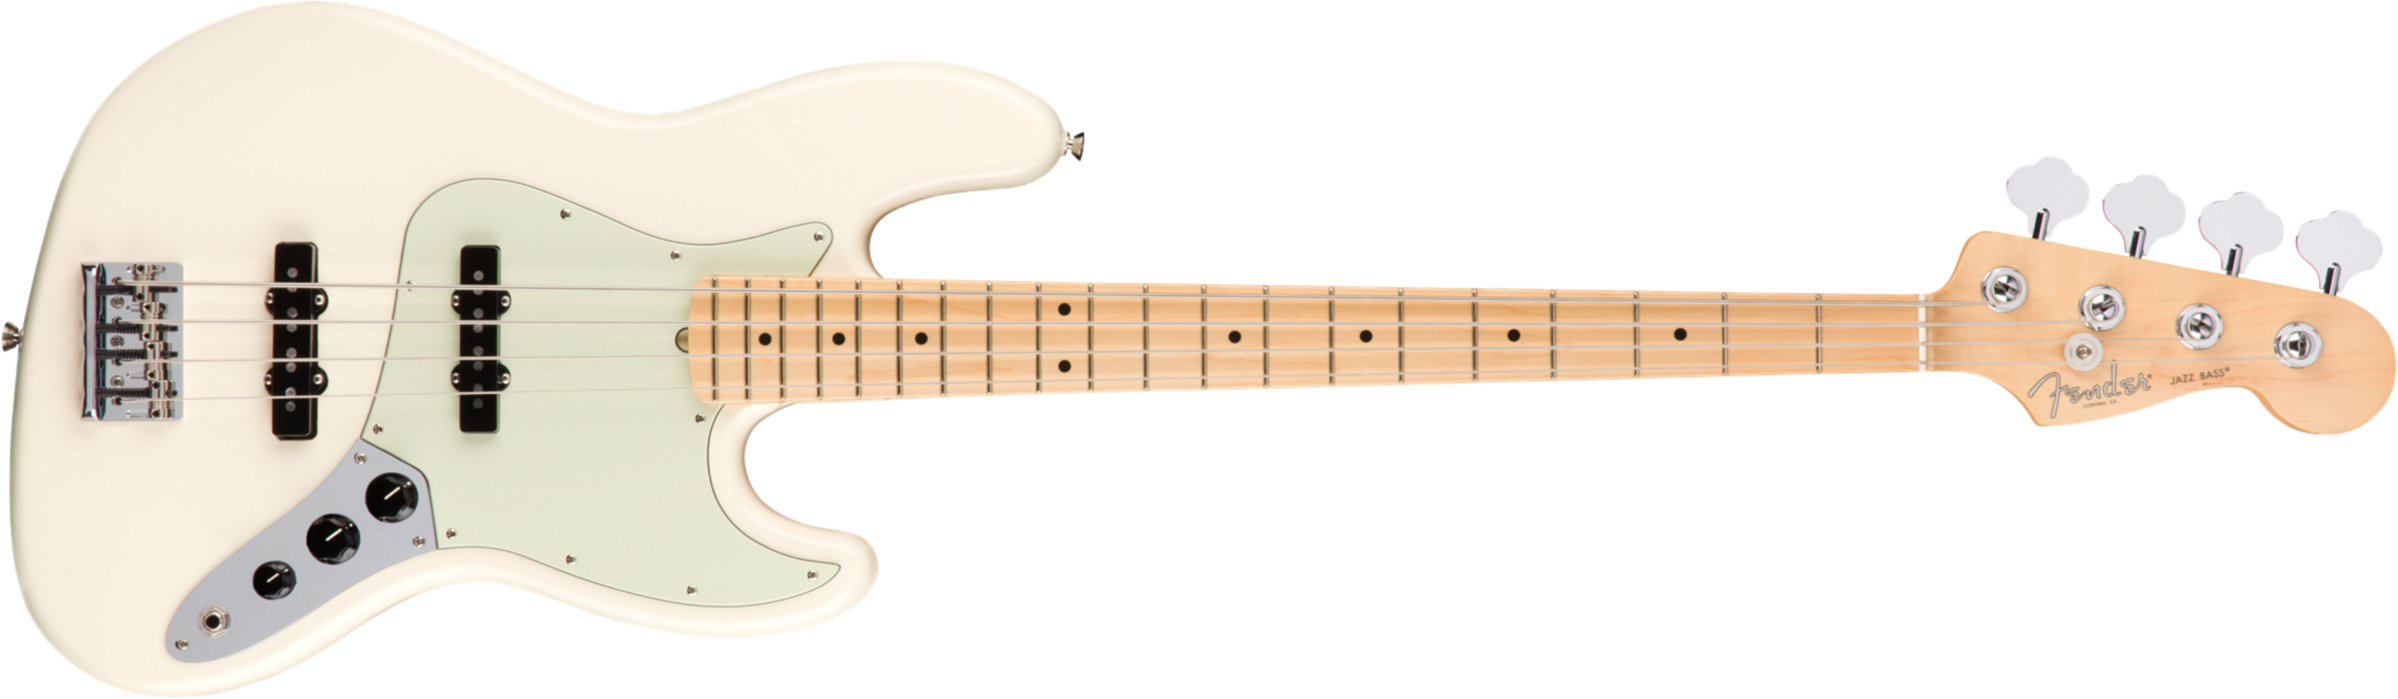 Fender Jazz Bass American Professional 2017 Usa  Mn - Olympic White - Bajo eléctrico de cuerpo sólido - Main picture